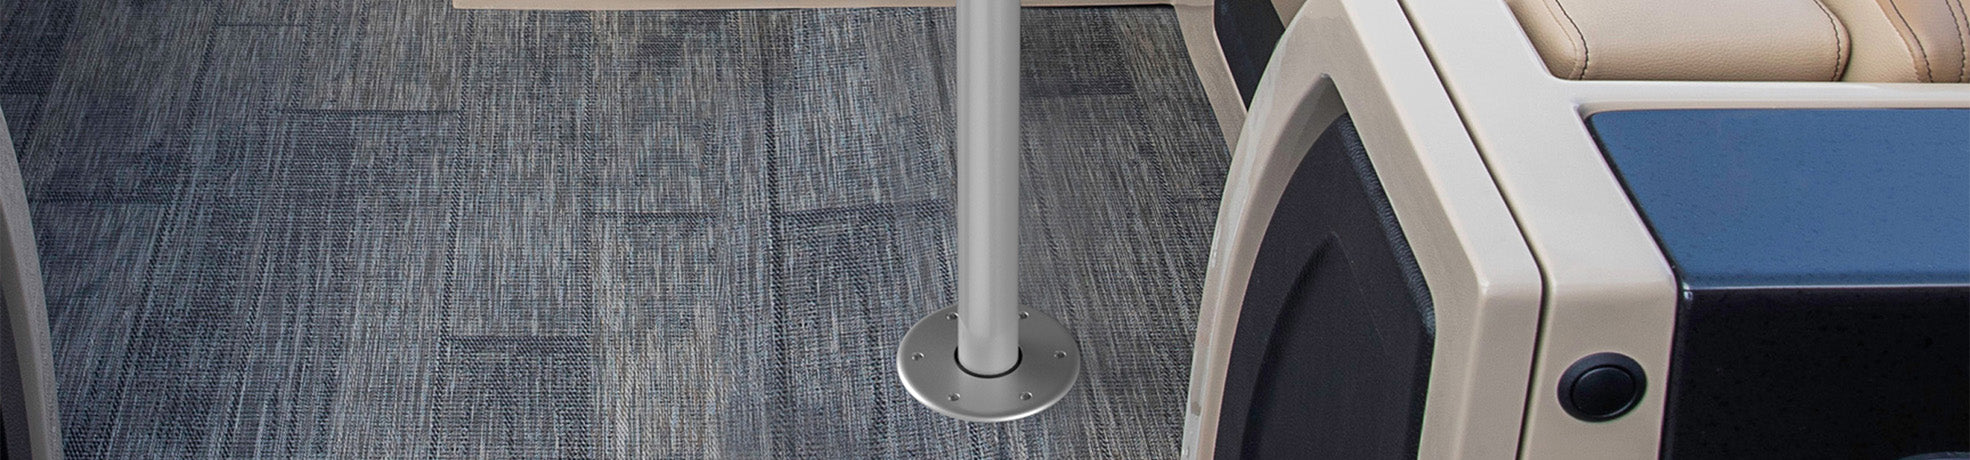 SurFit table leg installed on a boat deck